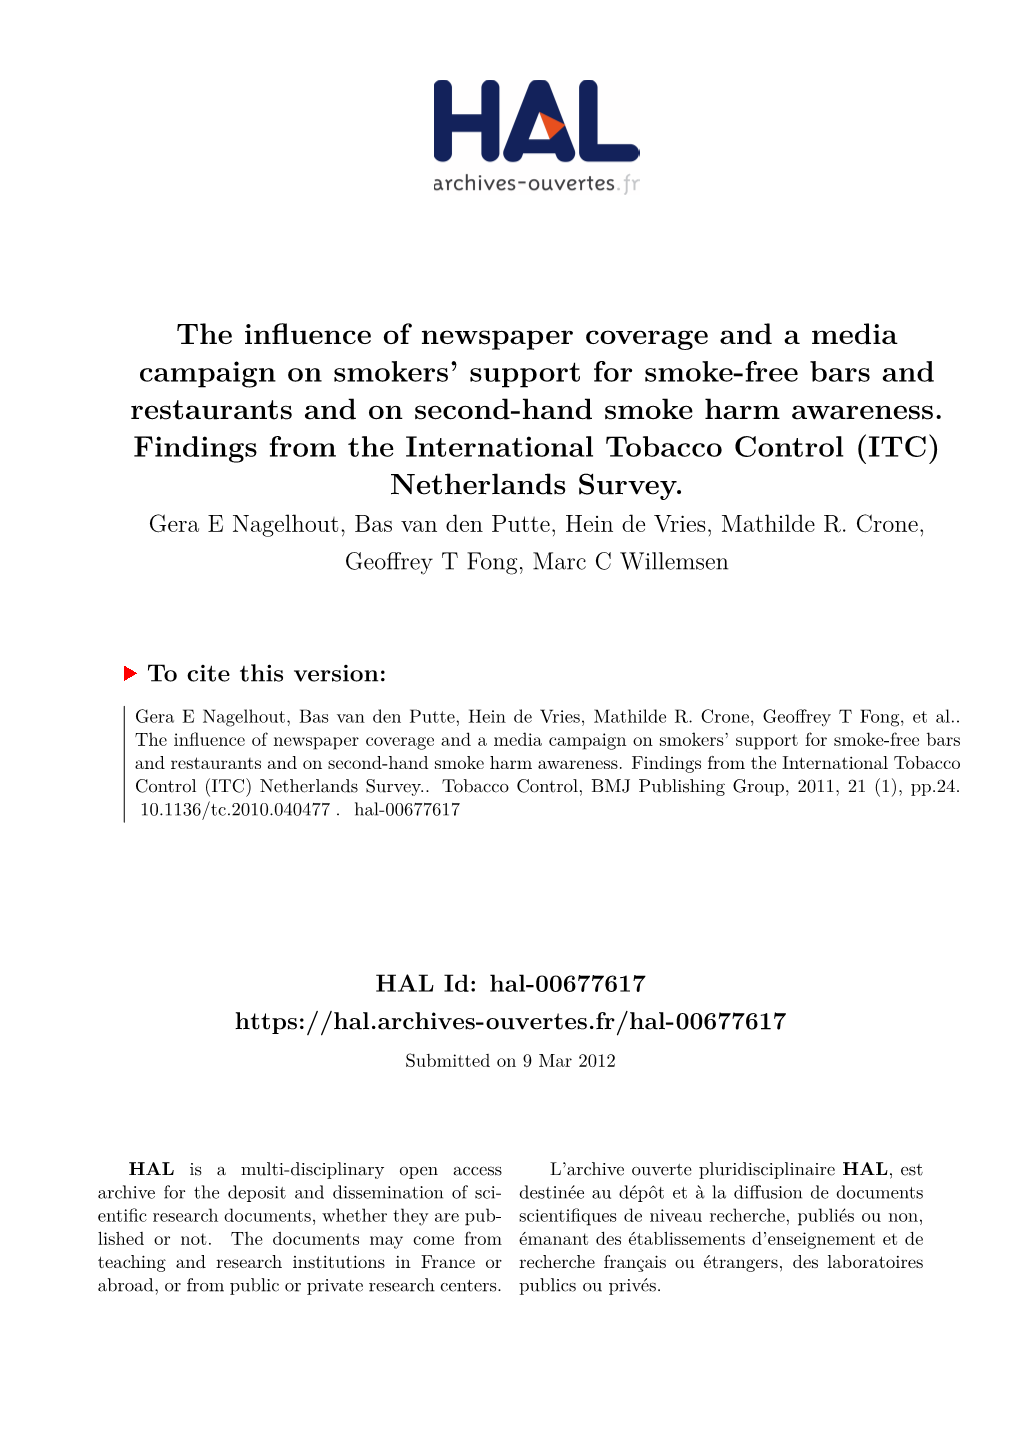 The Influence of Newspaper Coverage and a Media Campaign on Smokers’ Support for Smoke-Free Bars and Restaurants and on Second-Hand Smoke Harm Awareness